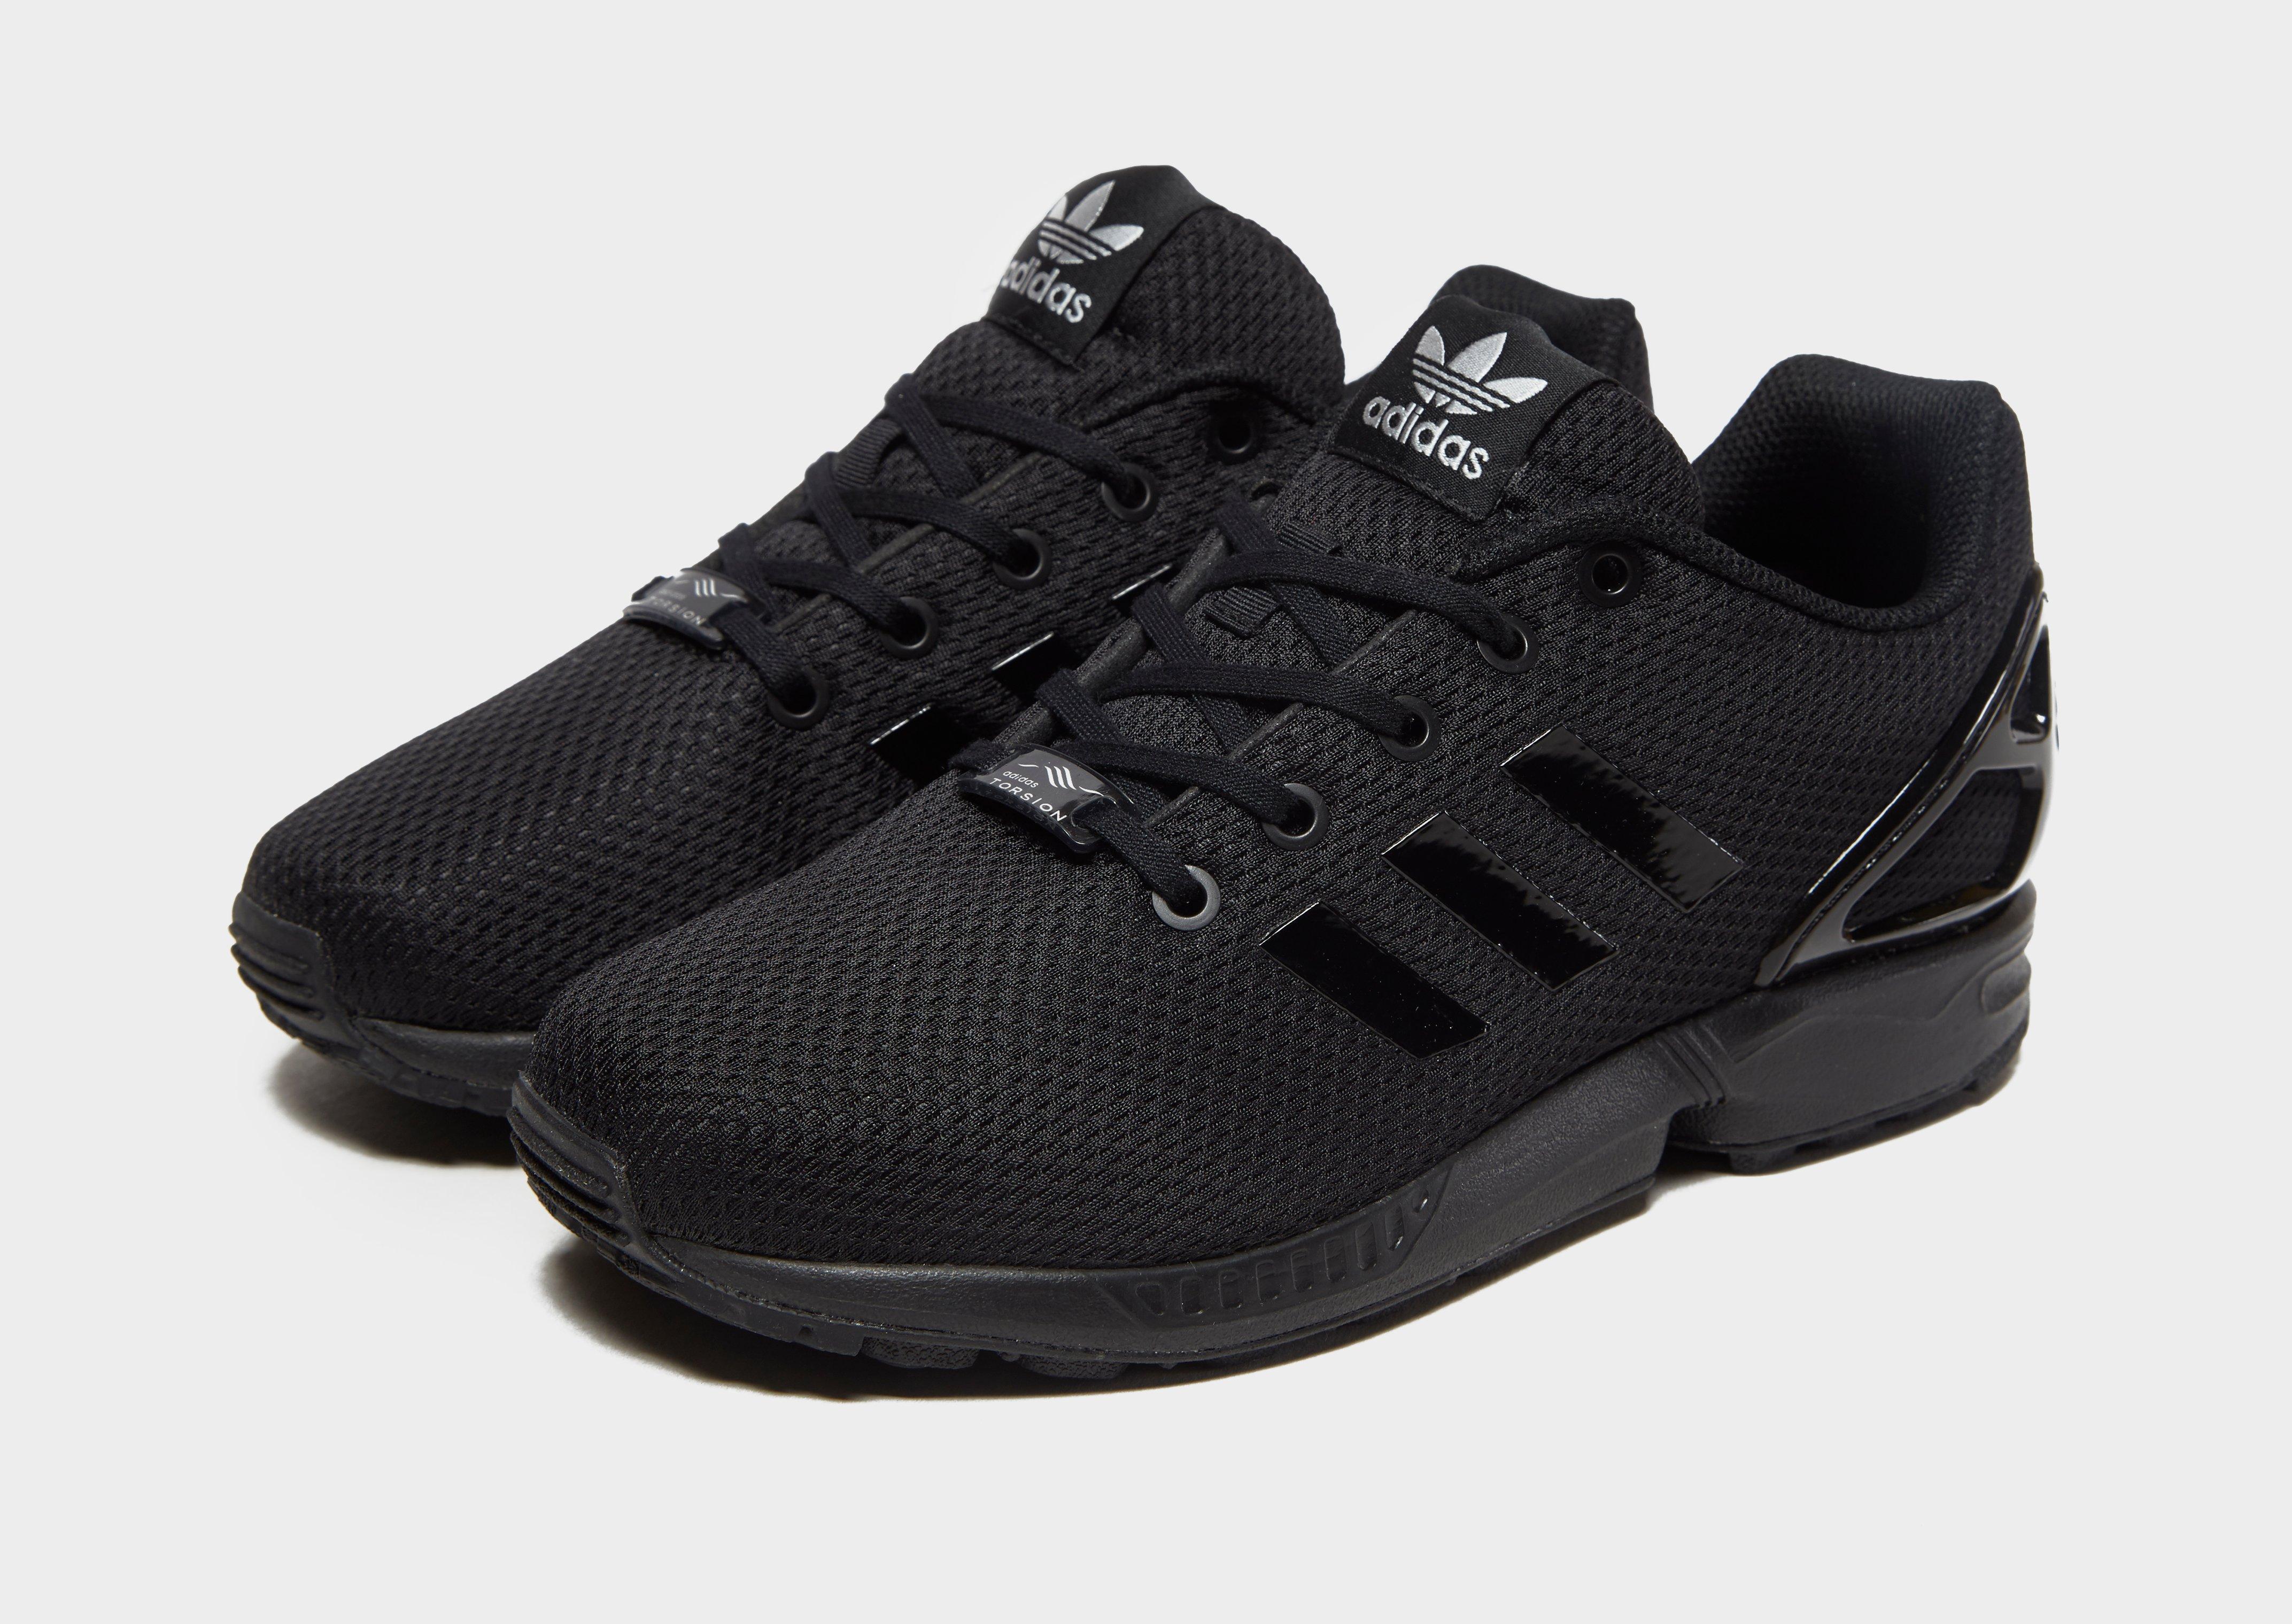 adidas zx flux junior Online Shopping mall | Find the best prices ...